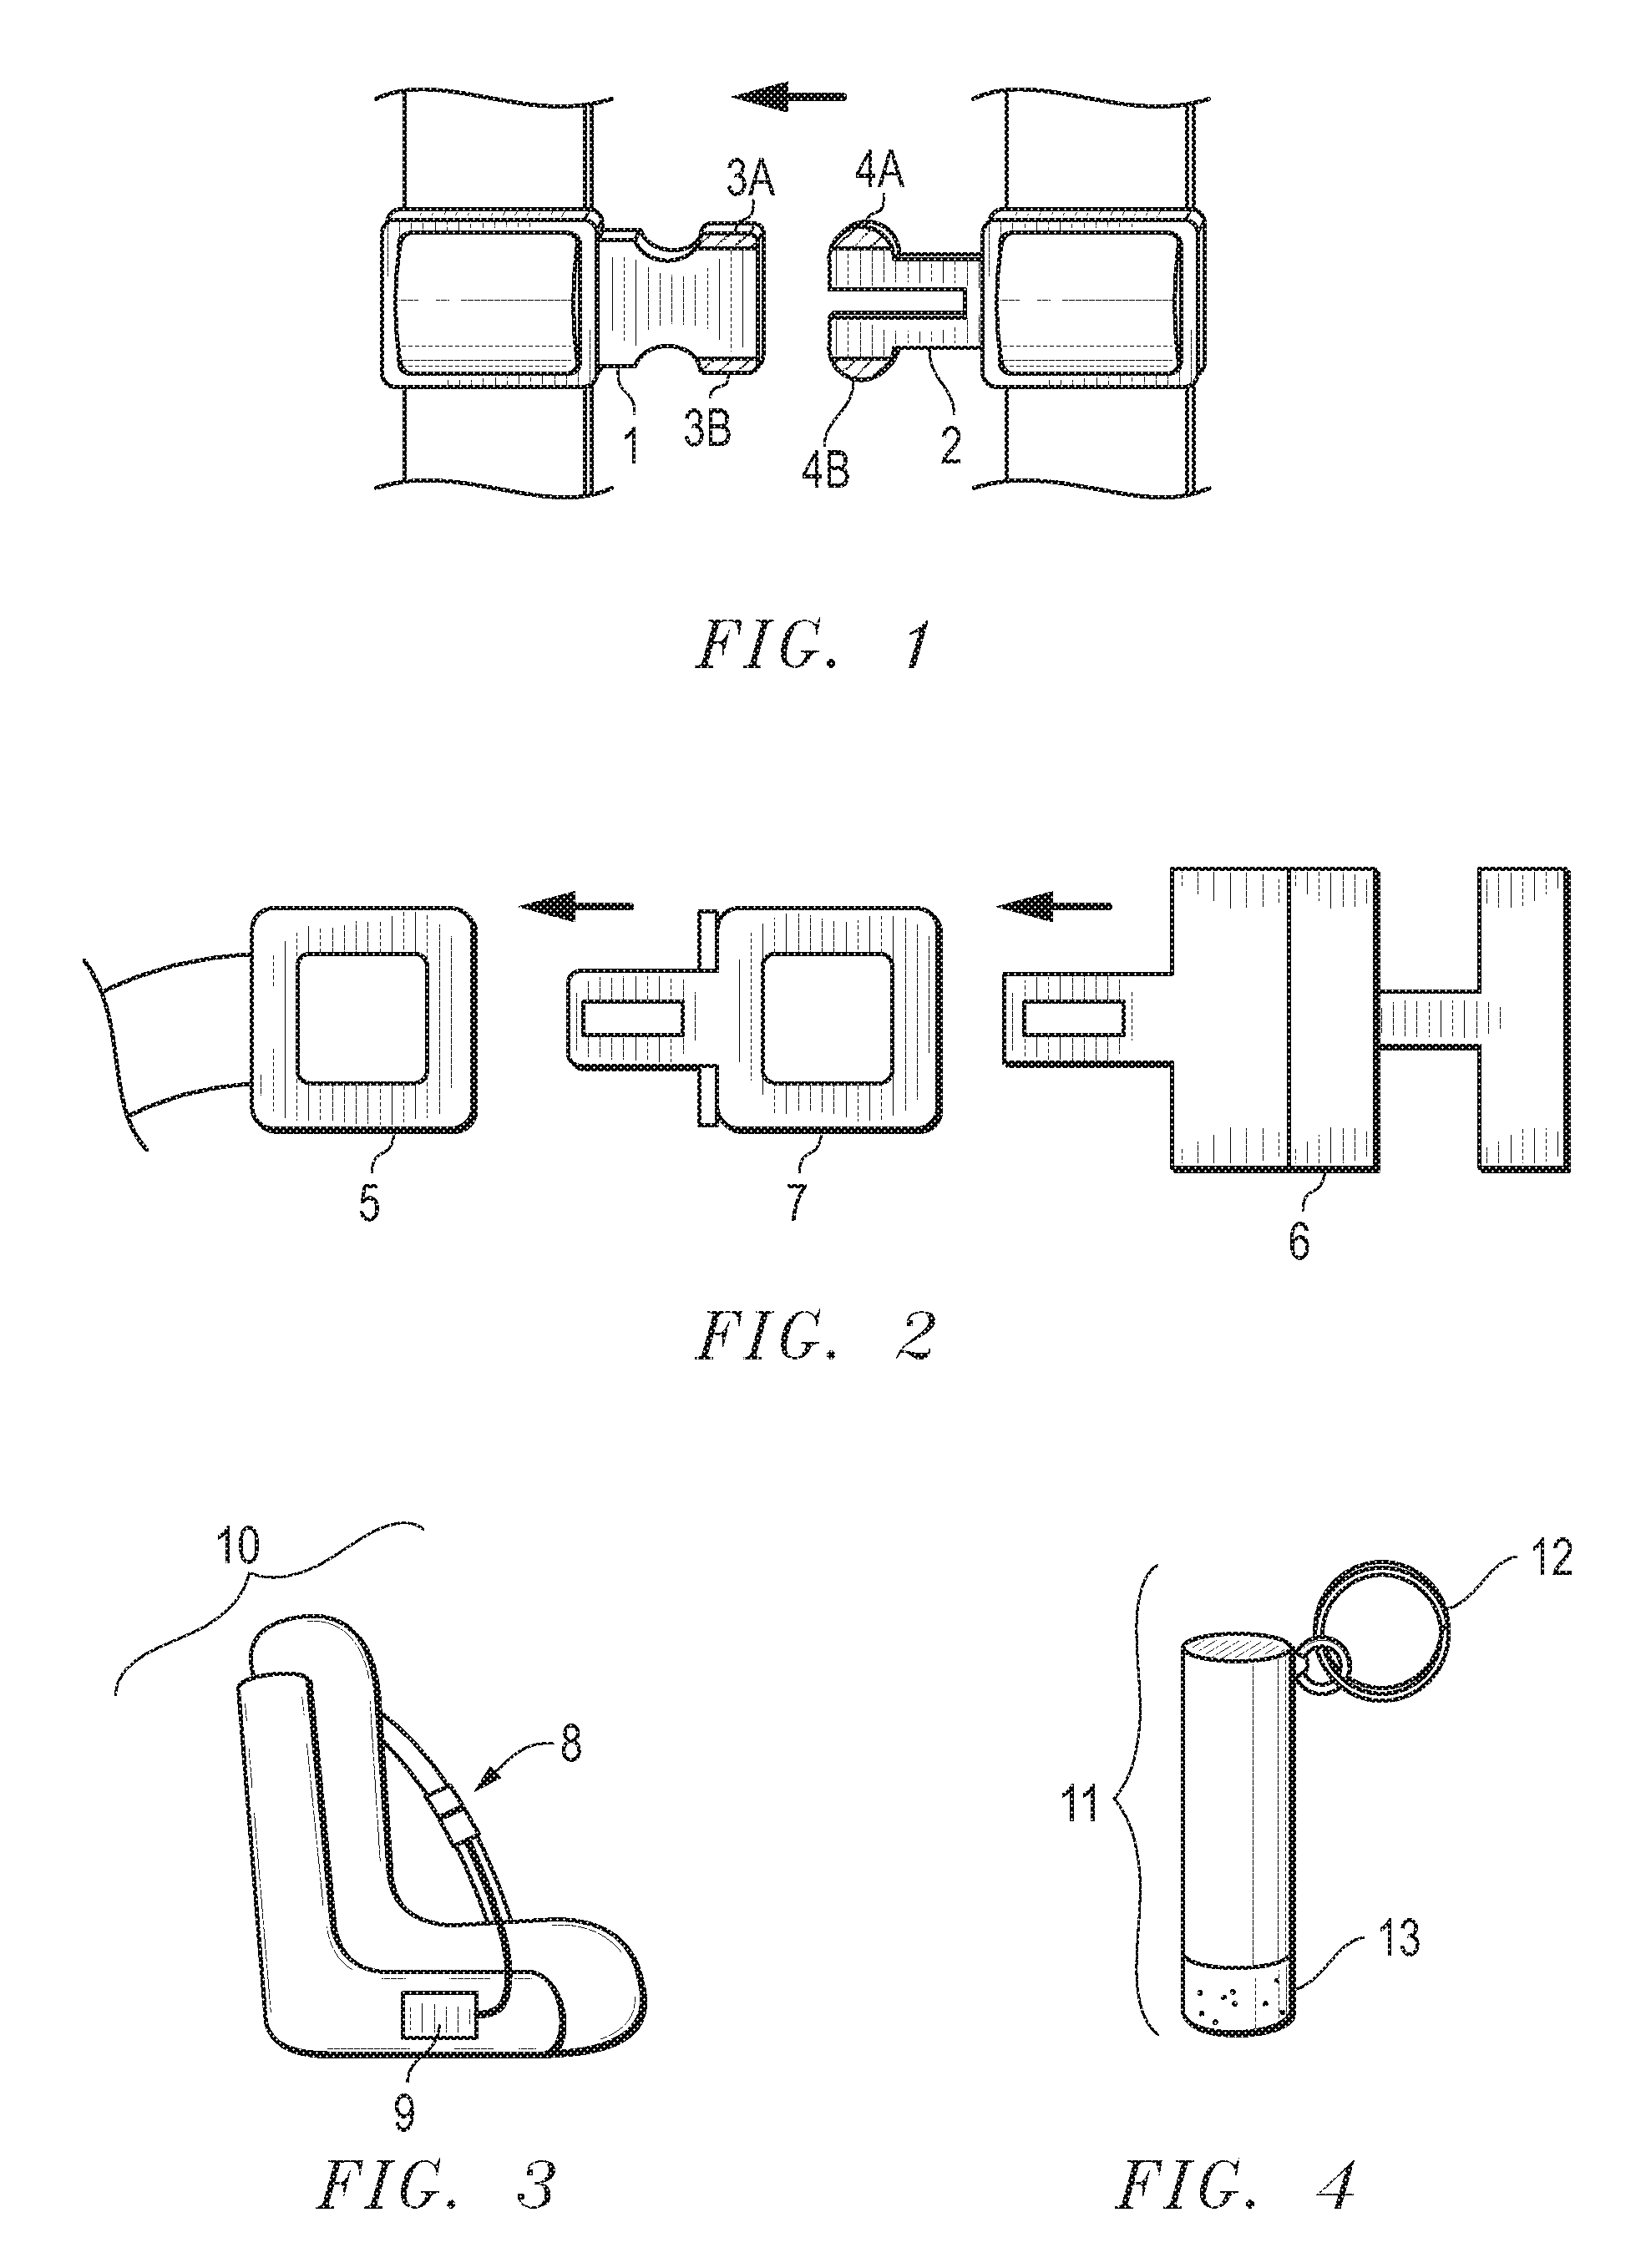 Child car seat safety system and method